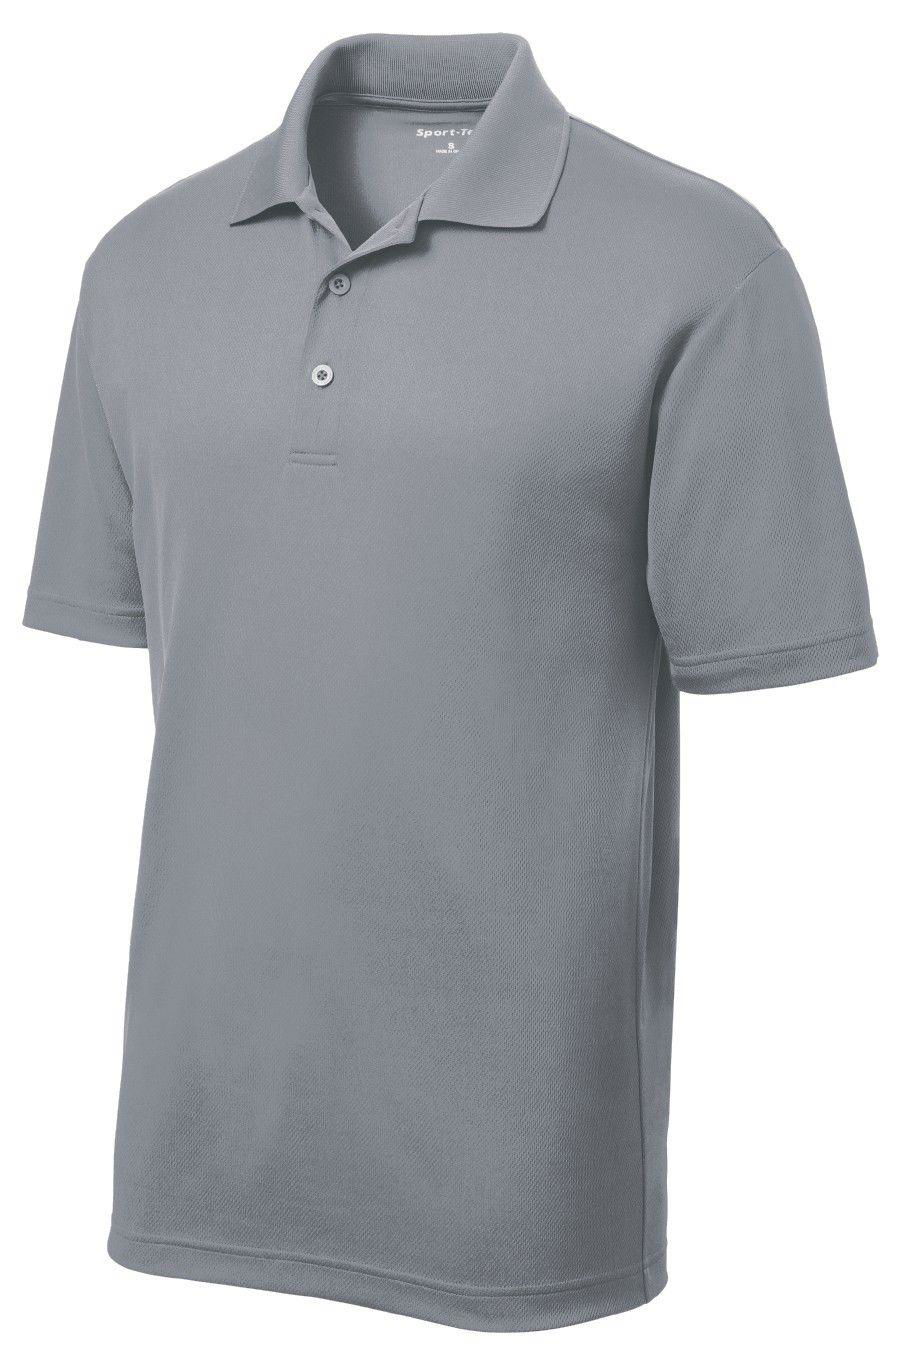 100% polyester dry fit men's sports polo t shirts 3